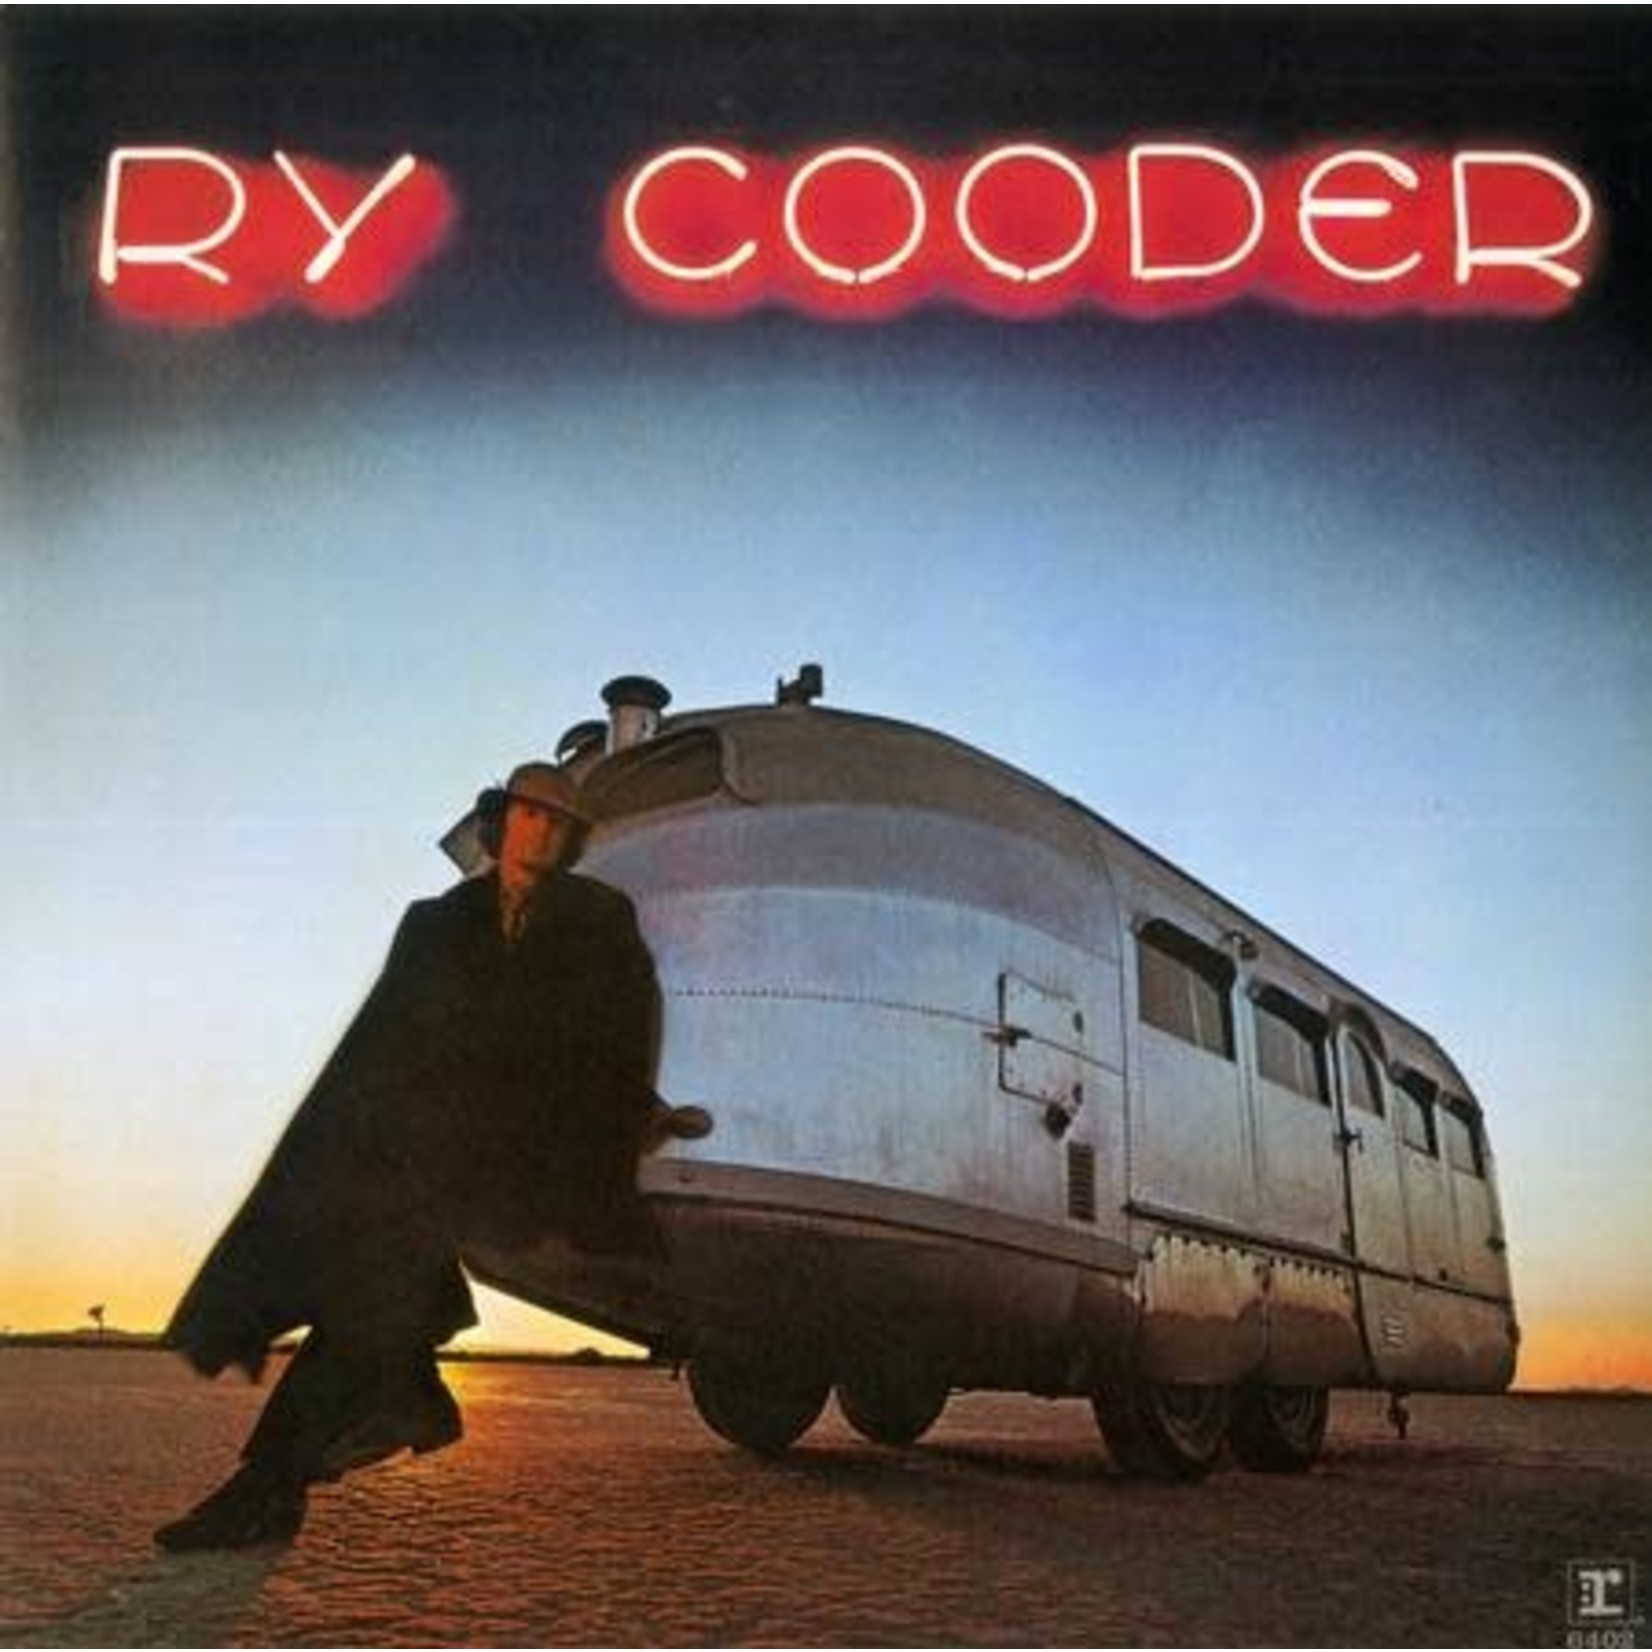 [New] Ry Cooder - Ry Cooder